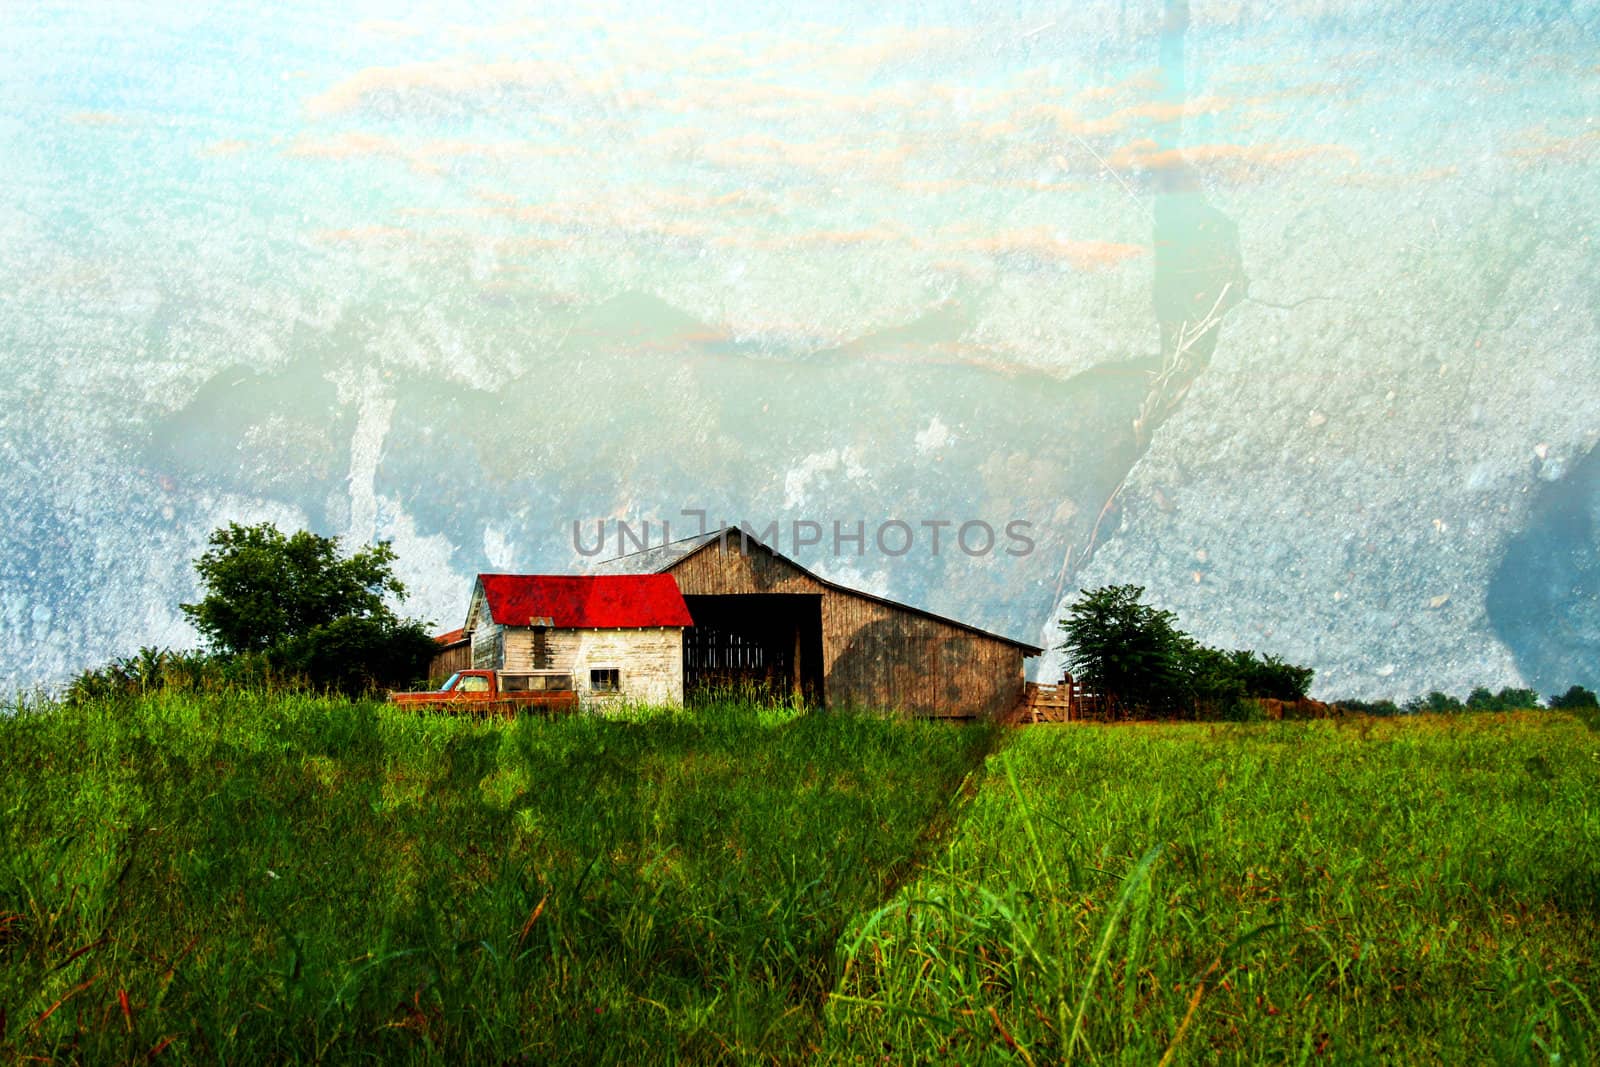 Old looking barn with textures and grunge look.
